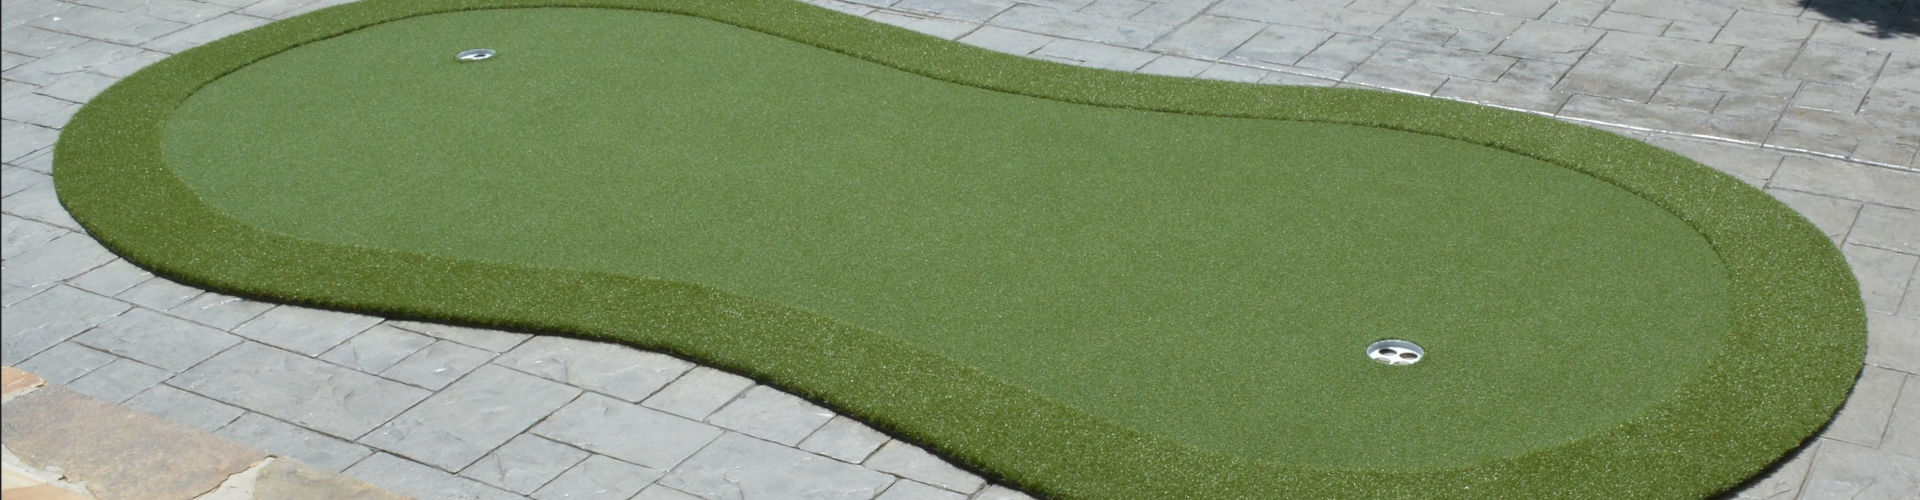 Southwest Greens of Connecticut Portable Putting Green